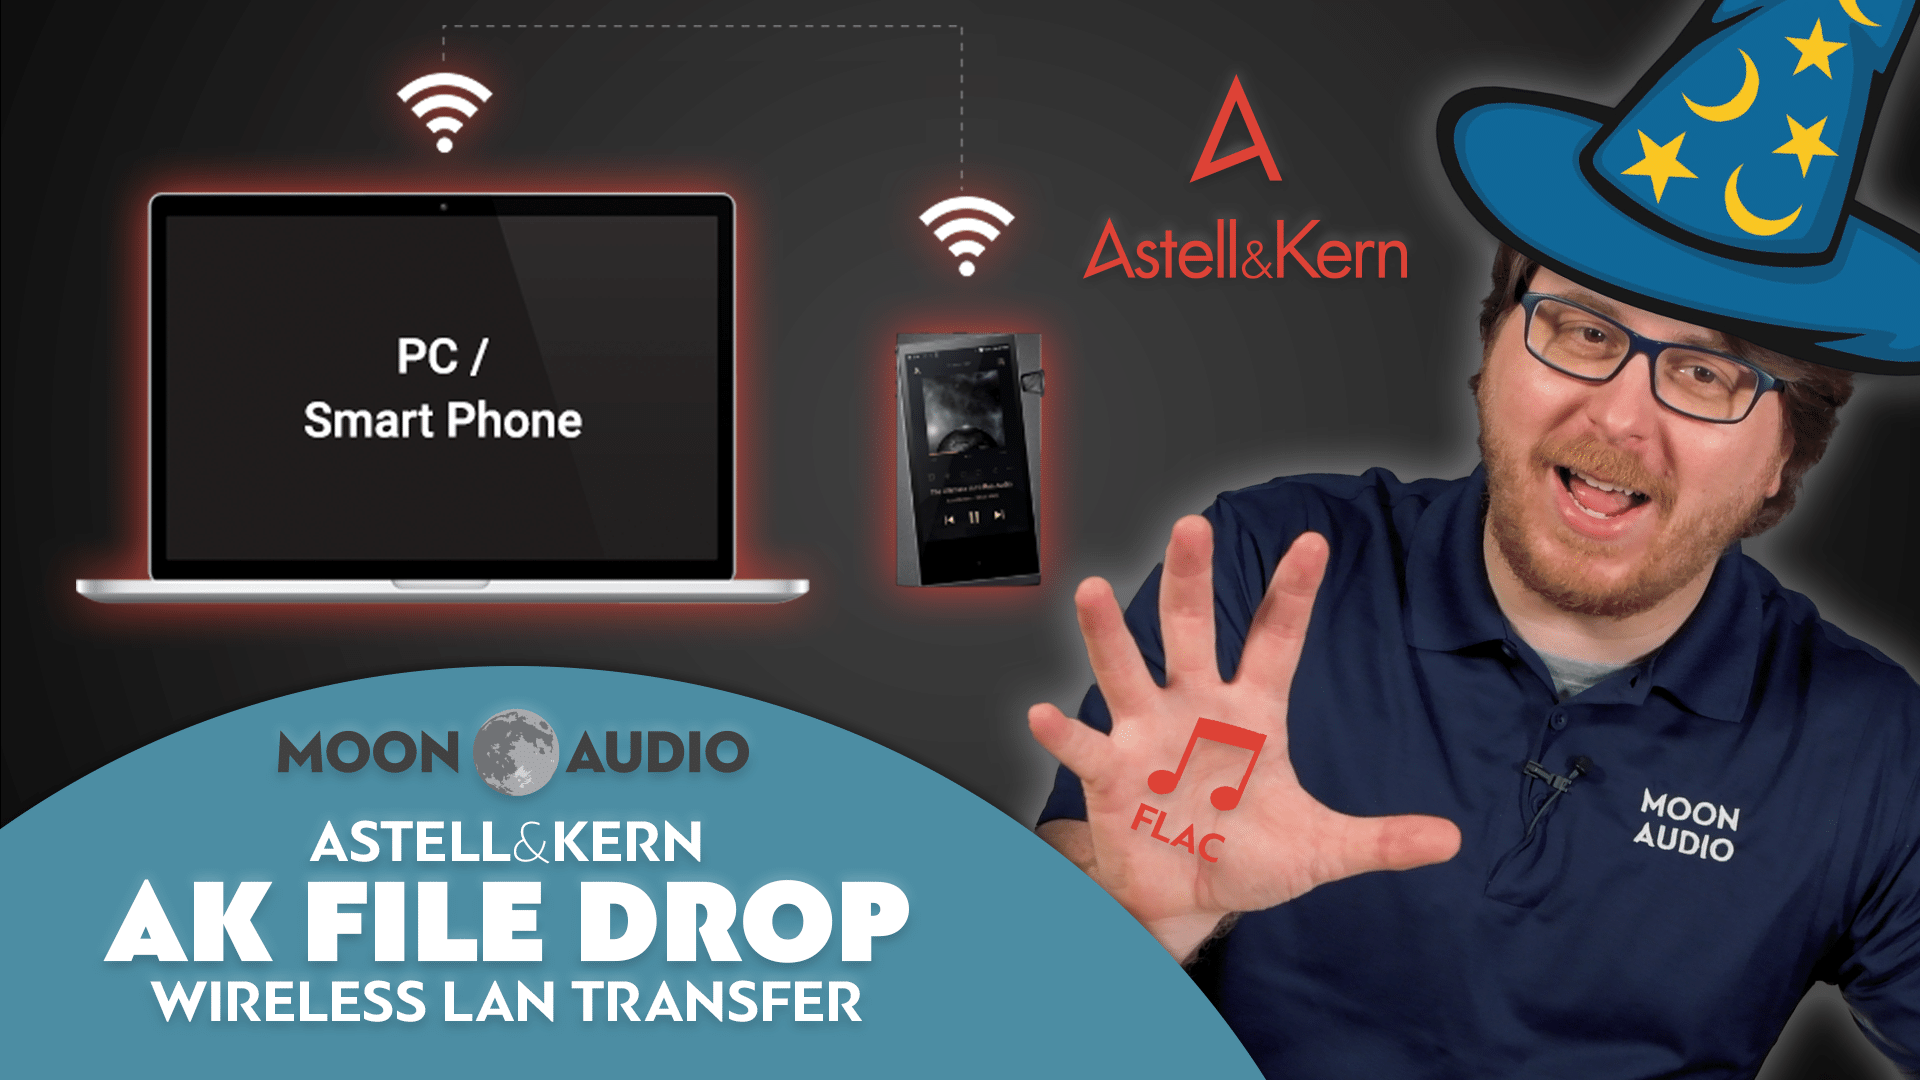 How To: Astell&Kern File Drop